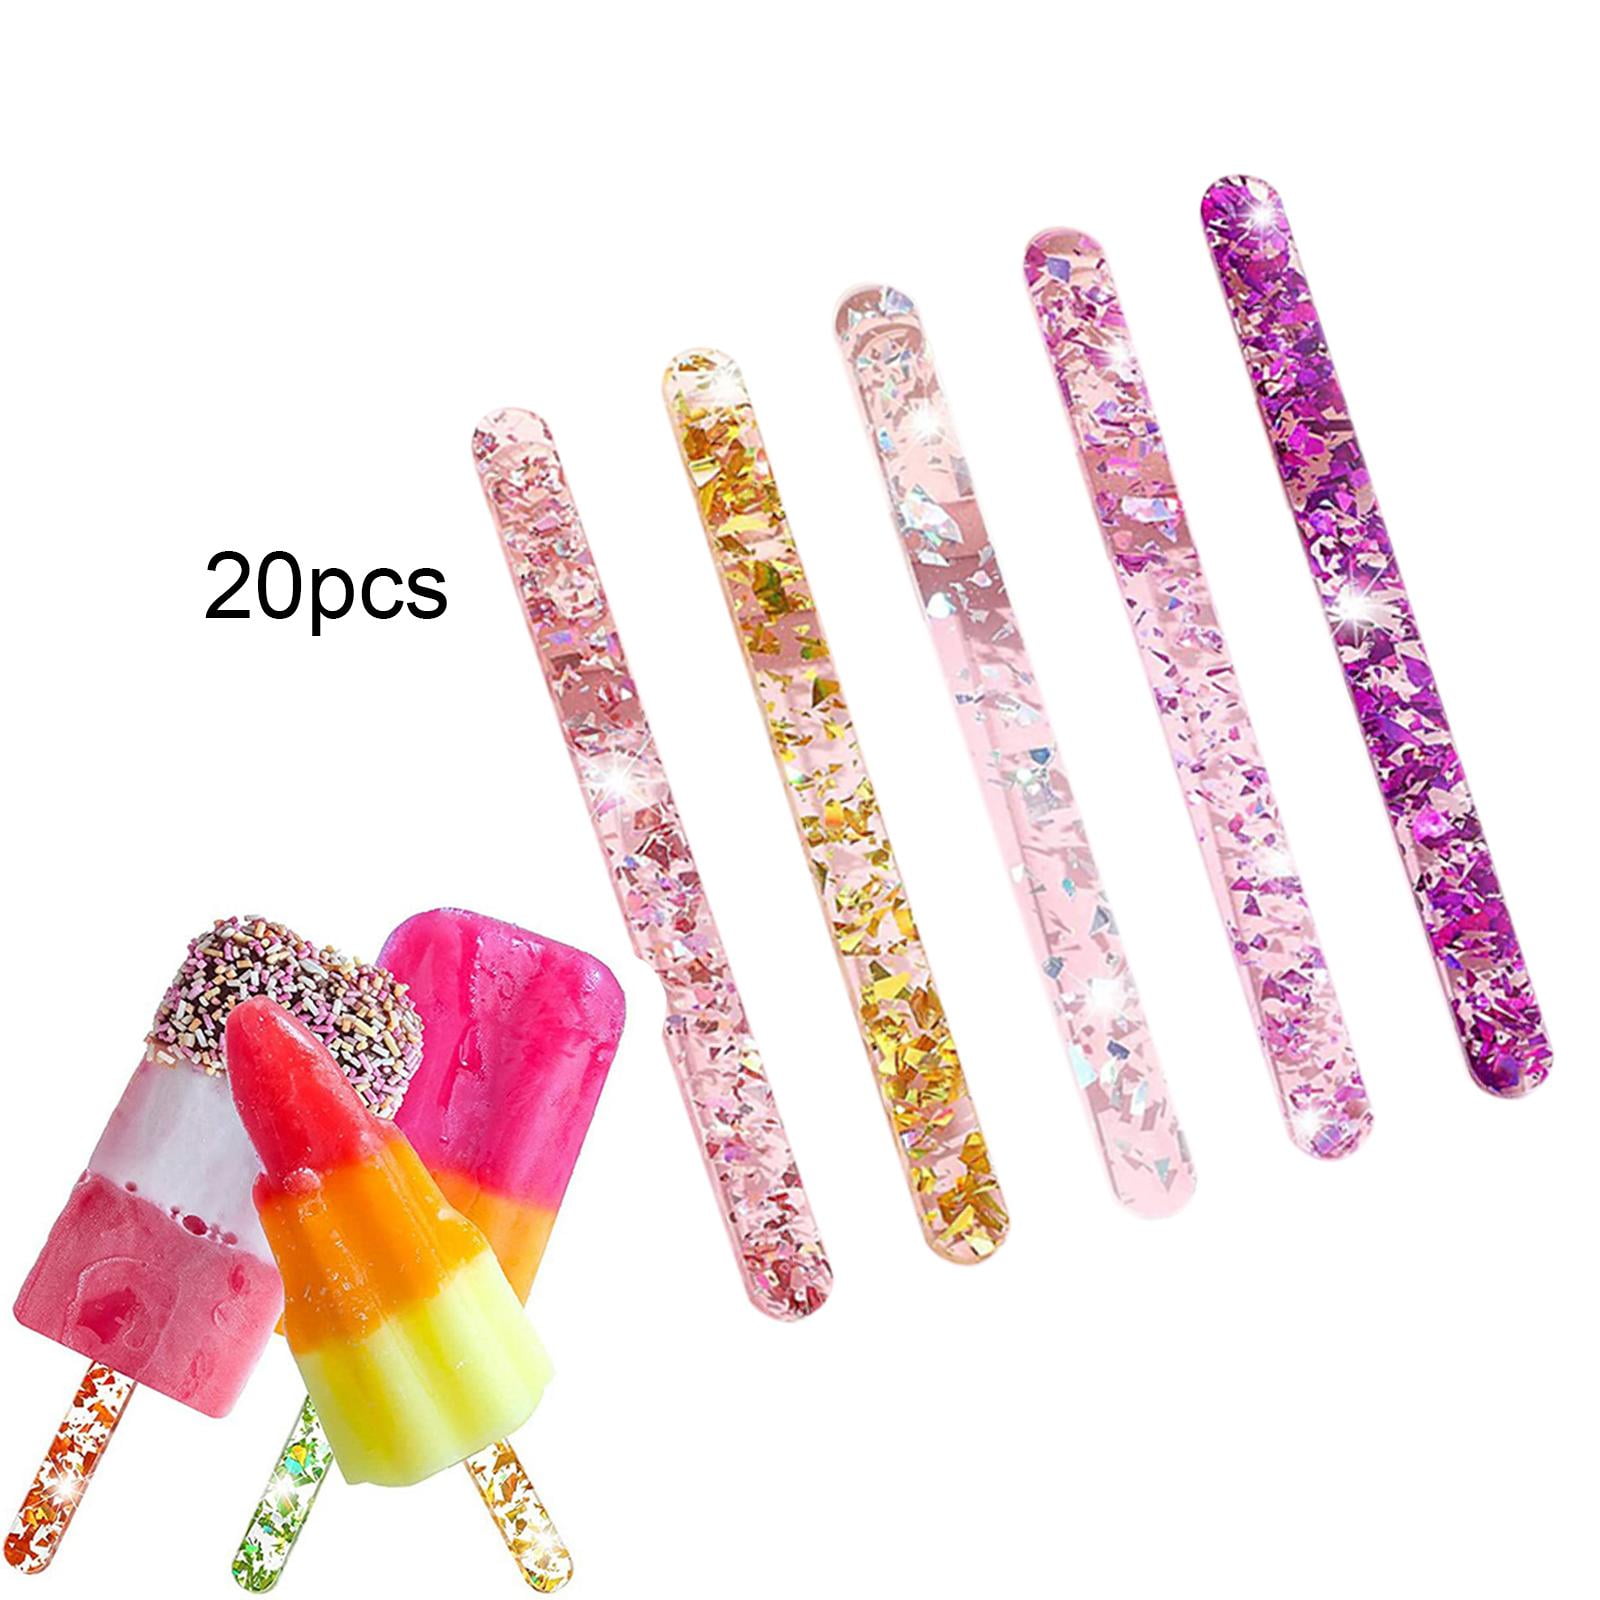 Reusable Acrylic Cakesicle Ice Cream Sticks Popsicle Stick Tools For Party  Favors Kids DIY Handmade Making Crafts XBJK2104 From Santi, $1.62